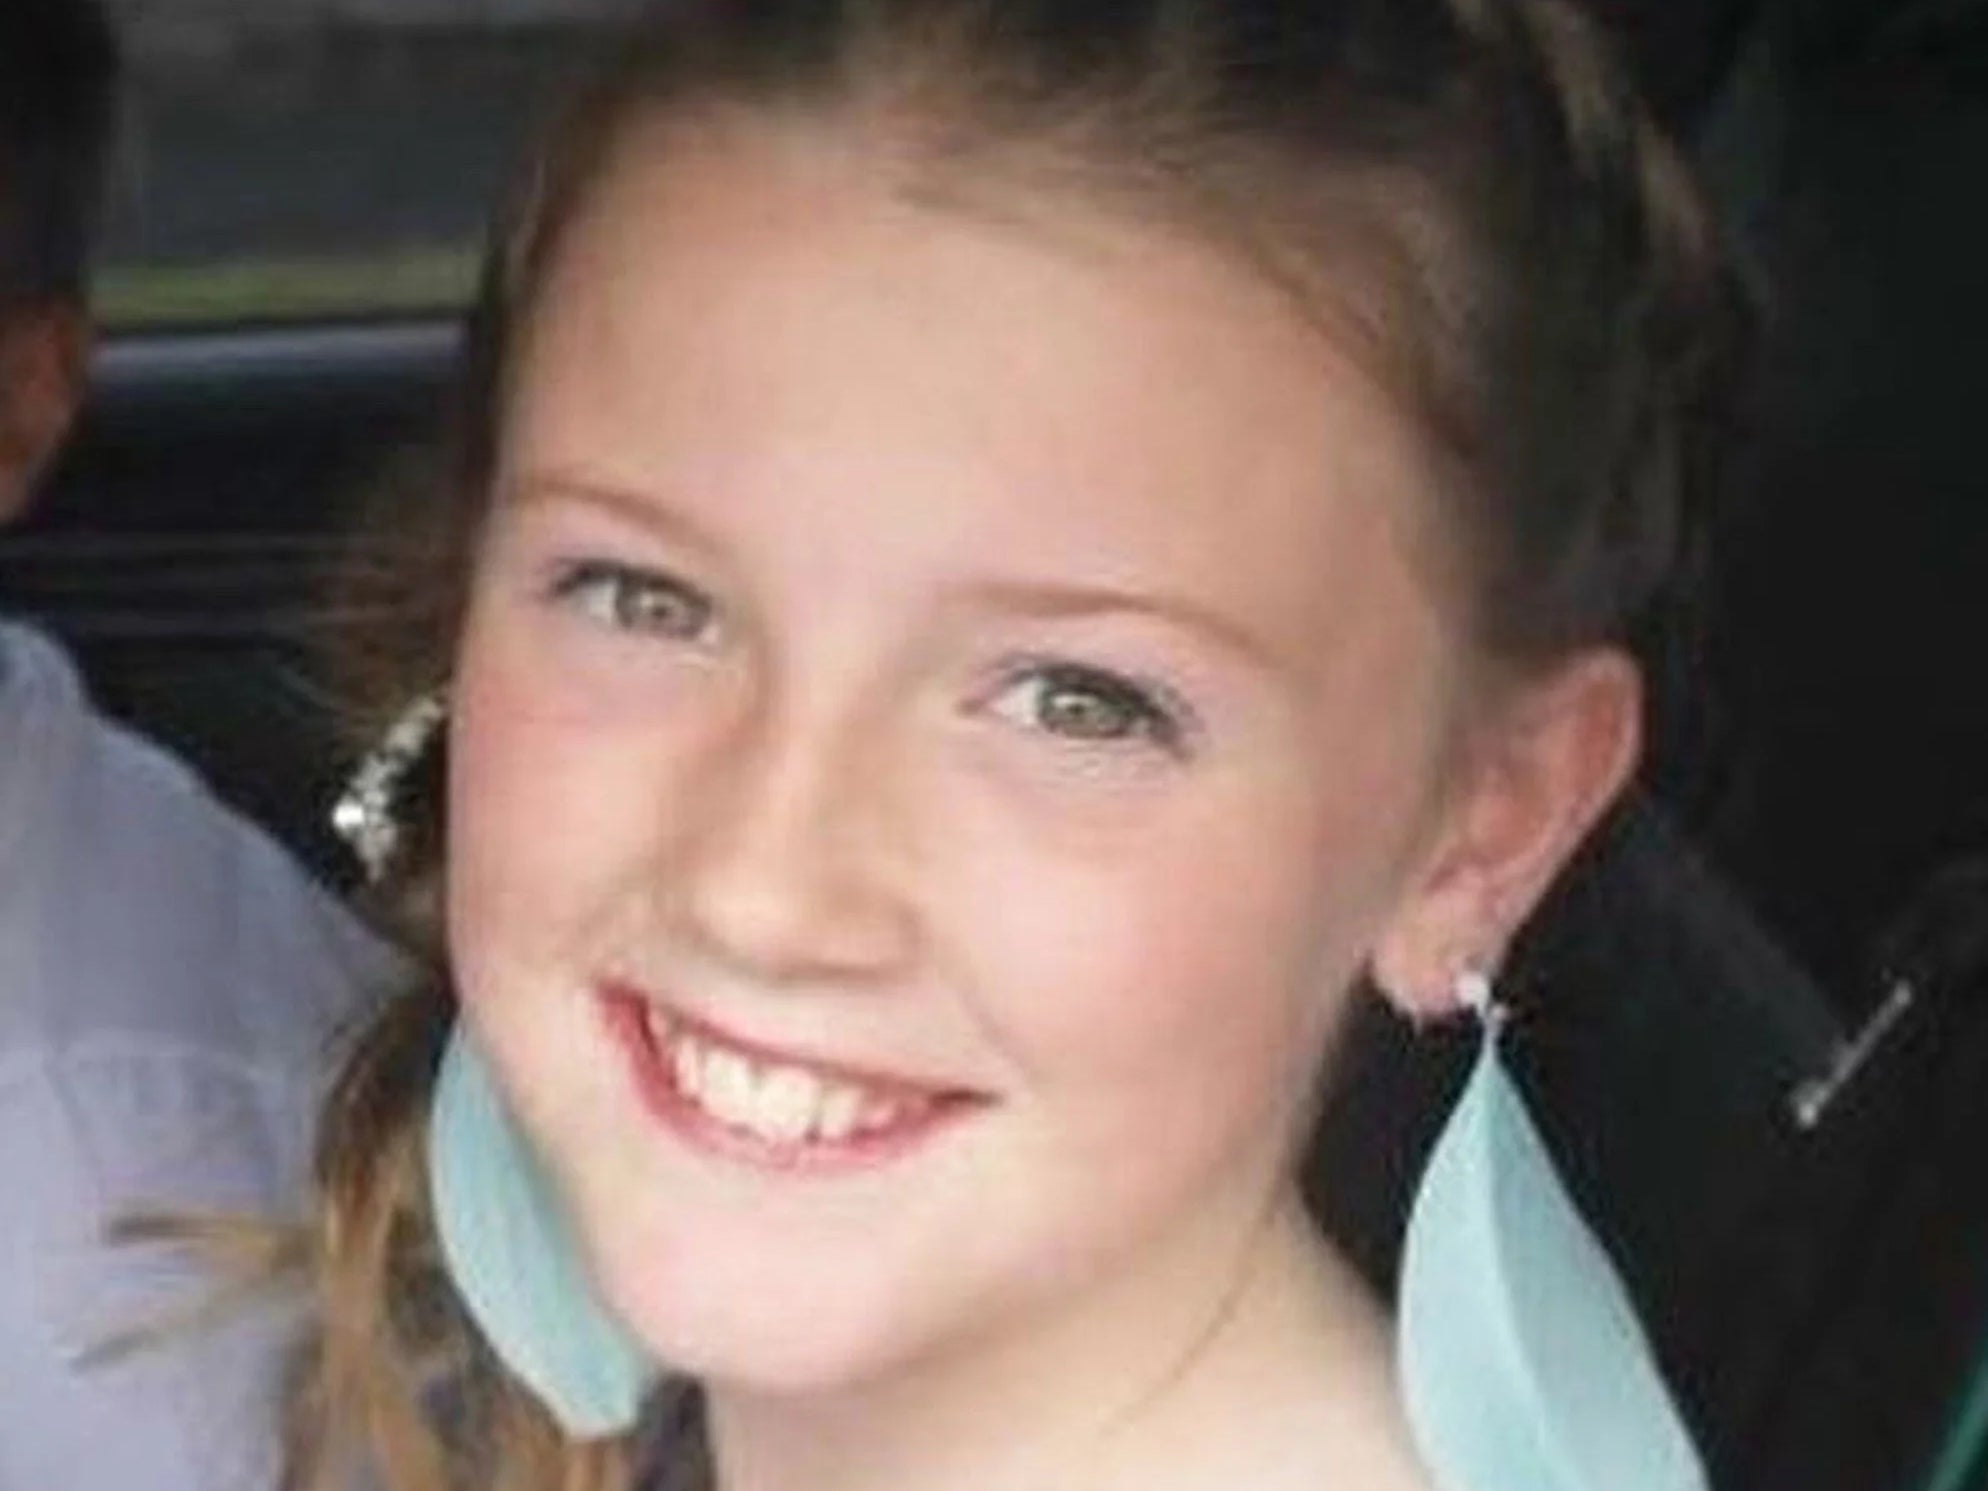 Jessica Lawson was 12 when she drowned on a school trip near Limoges, France